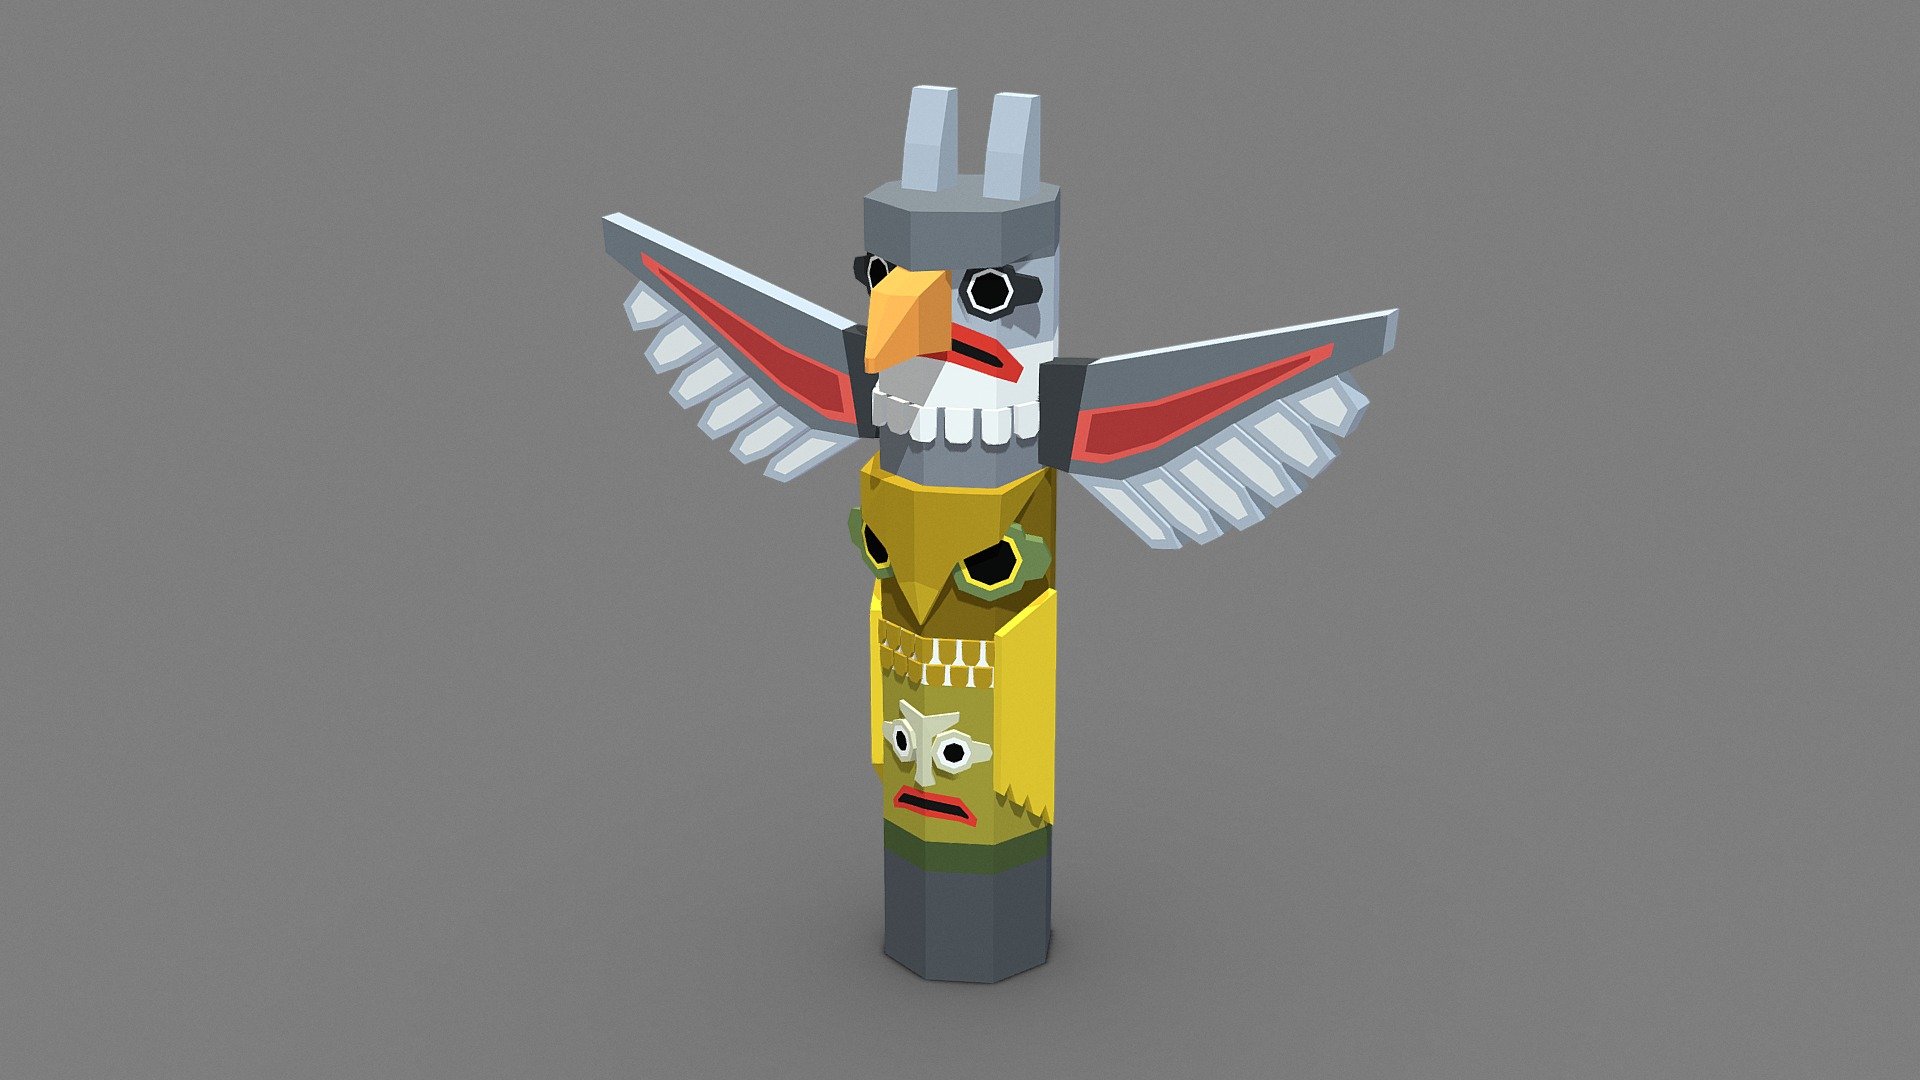 Low poly model of a totem.

This is an asset for my upcoming mobile game Double Rocks. The game setting is inspired by the “Twin Peaks” series and this model is a reference to the totem placed in the Great Northern Hotel.

The model is flat shaded low poly colored with a texture. Can be easily recolored. Optimized for mobile games 3d model